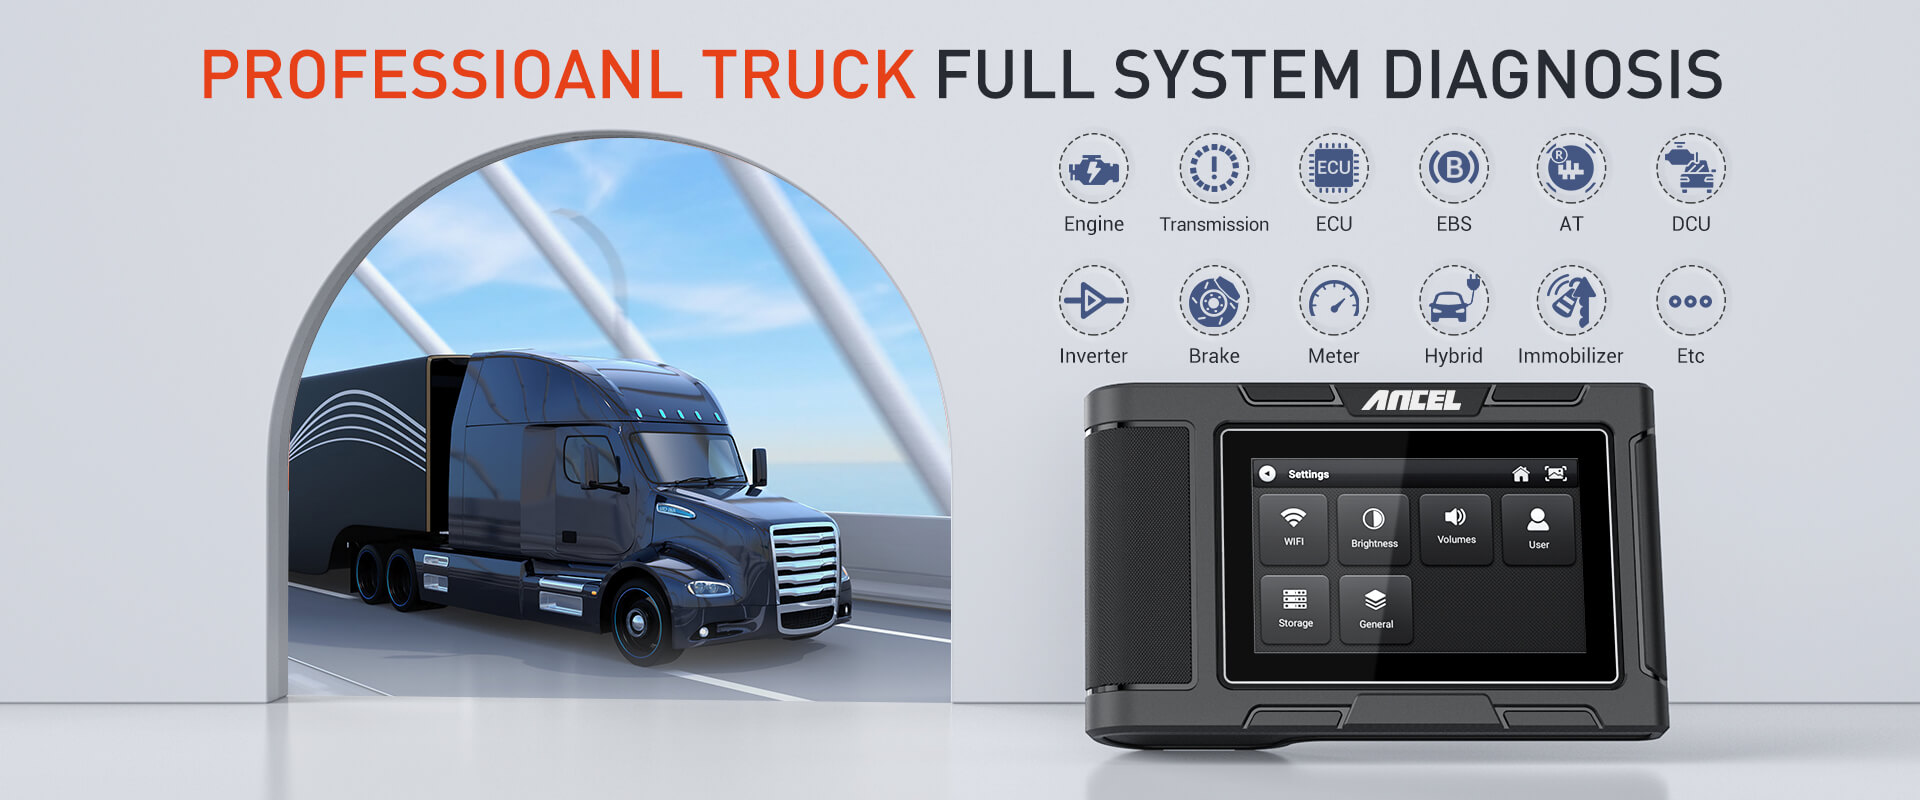 Professional Truck Full System Diagnosis